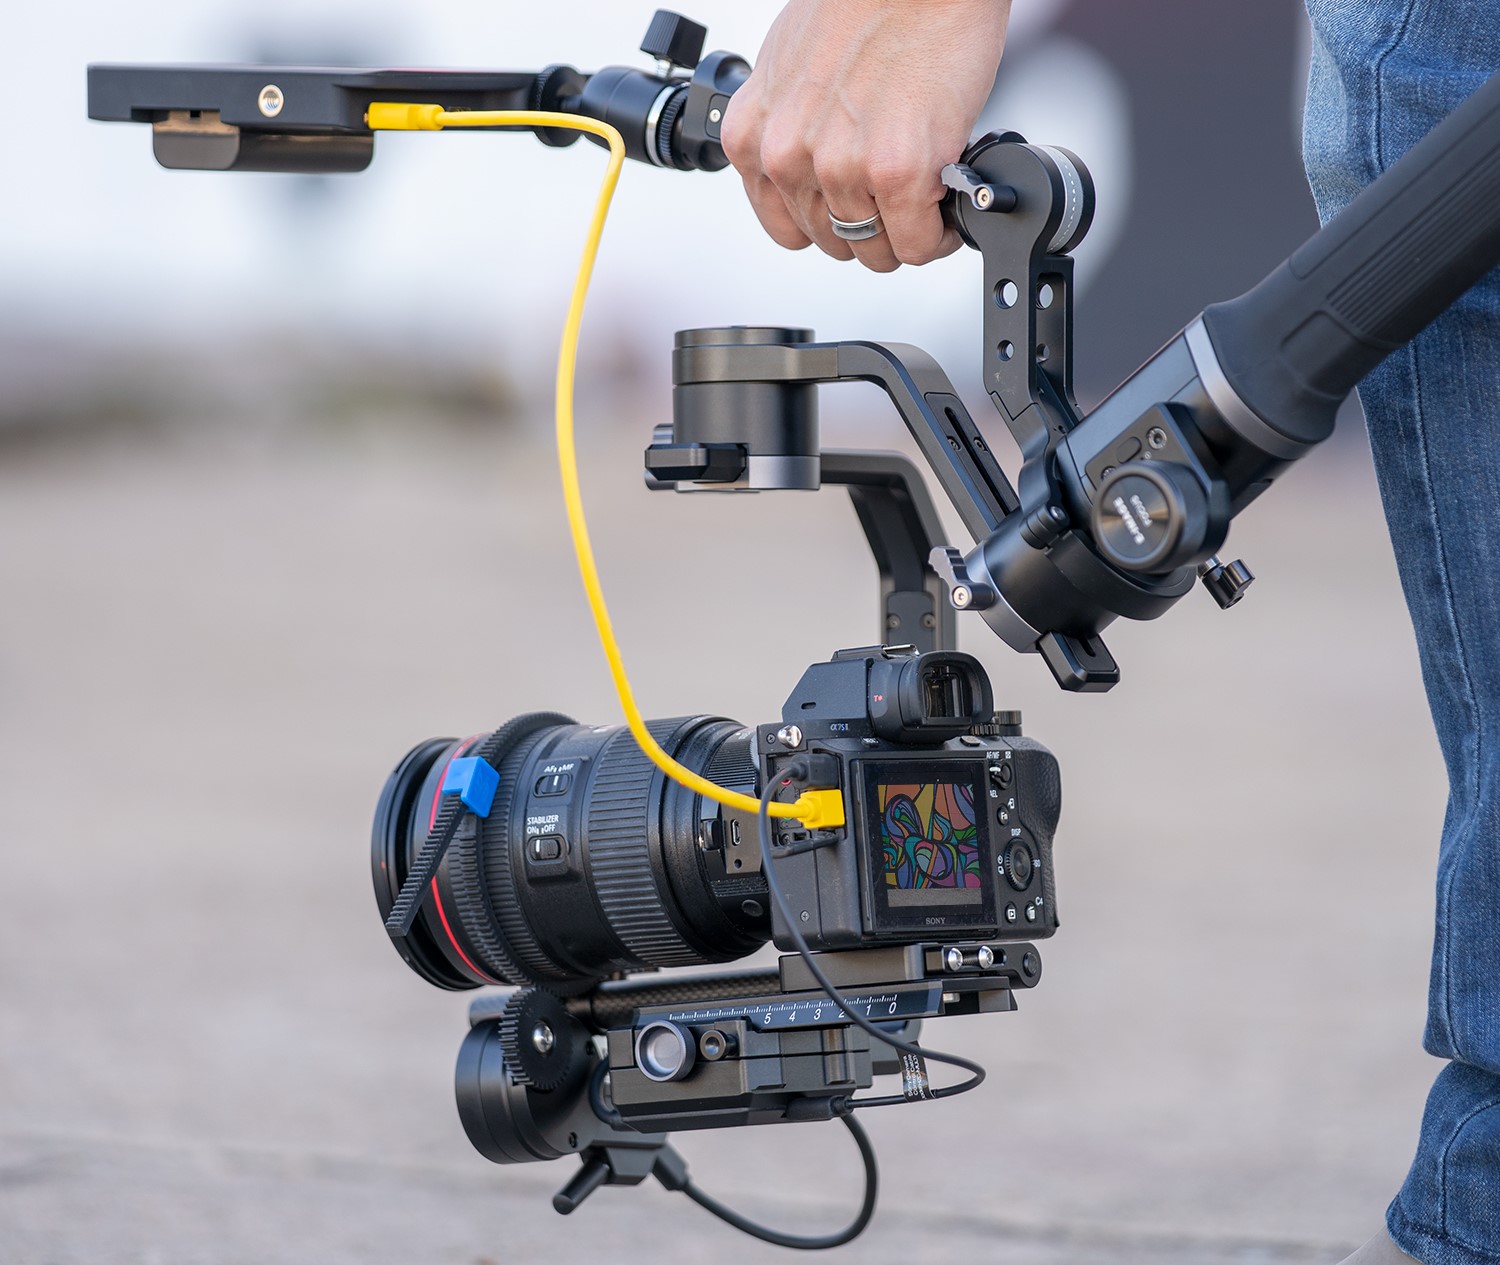 Gimbal Stabilizer Review: Enhancing Video Stability Effortlessly